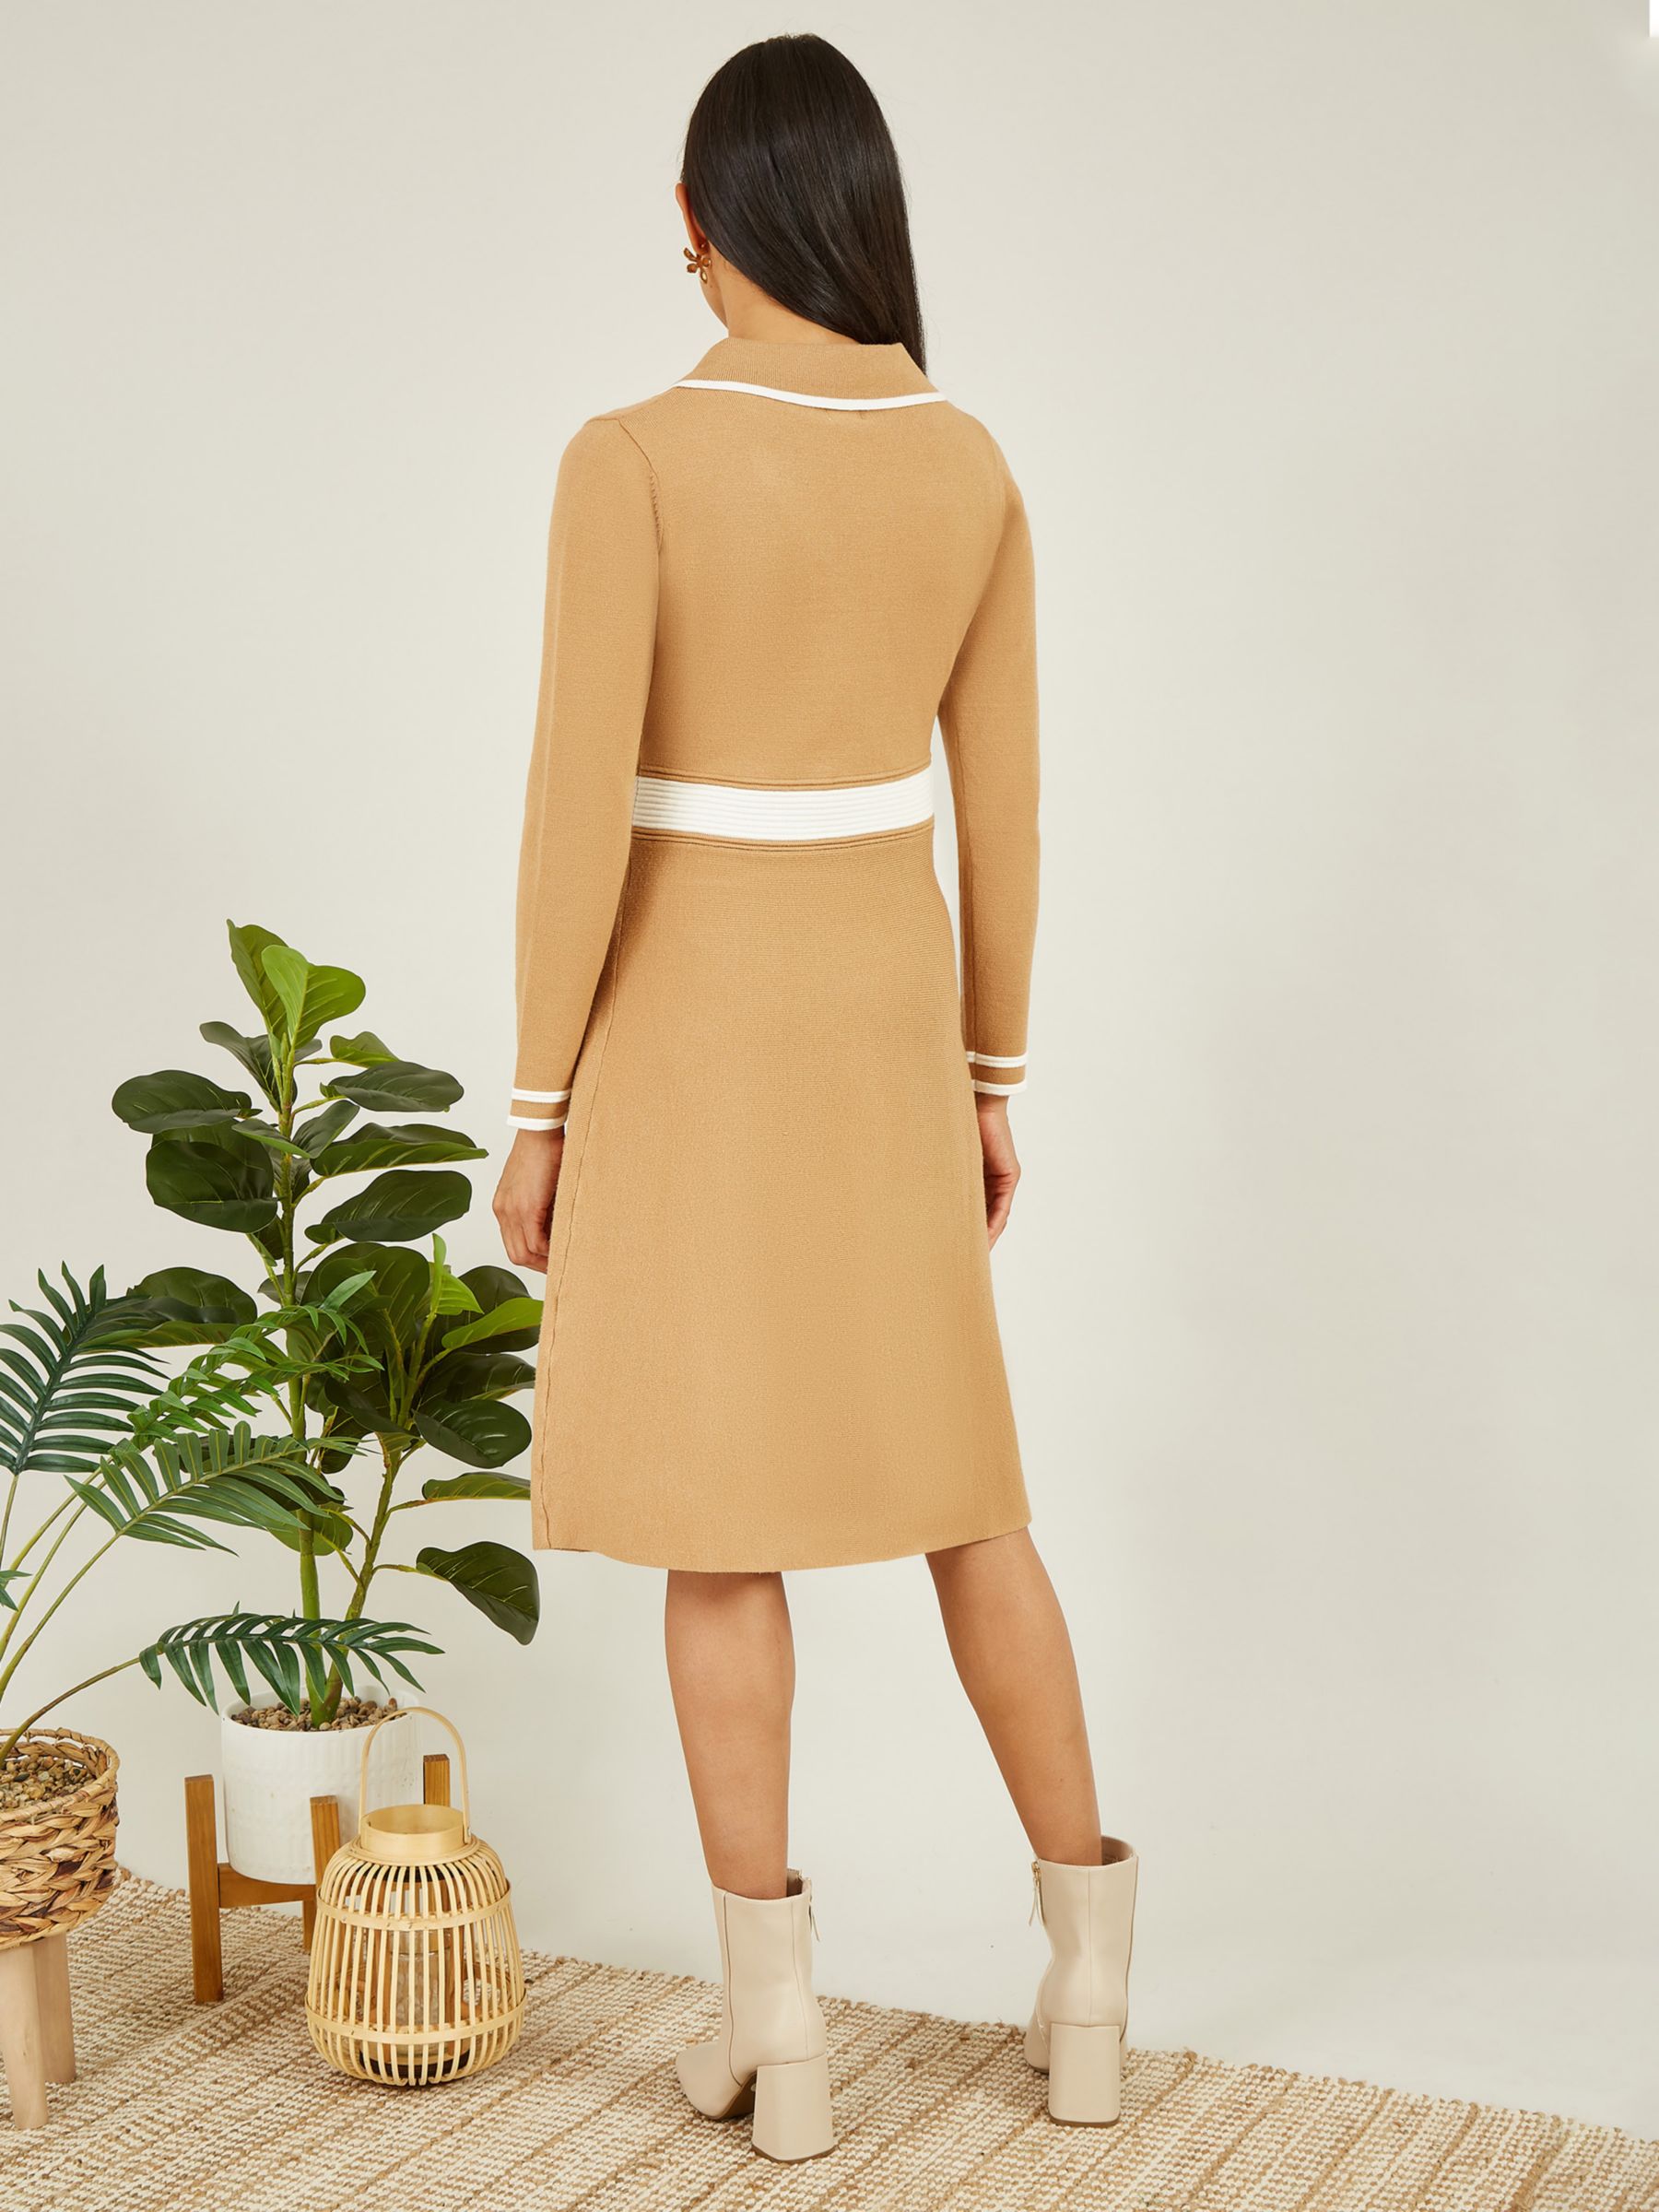 Yumi Contrast Collar Knitted Dress, Camel, M